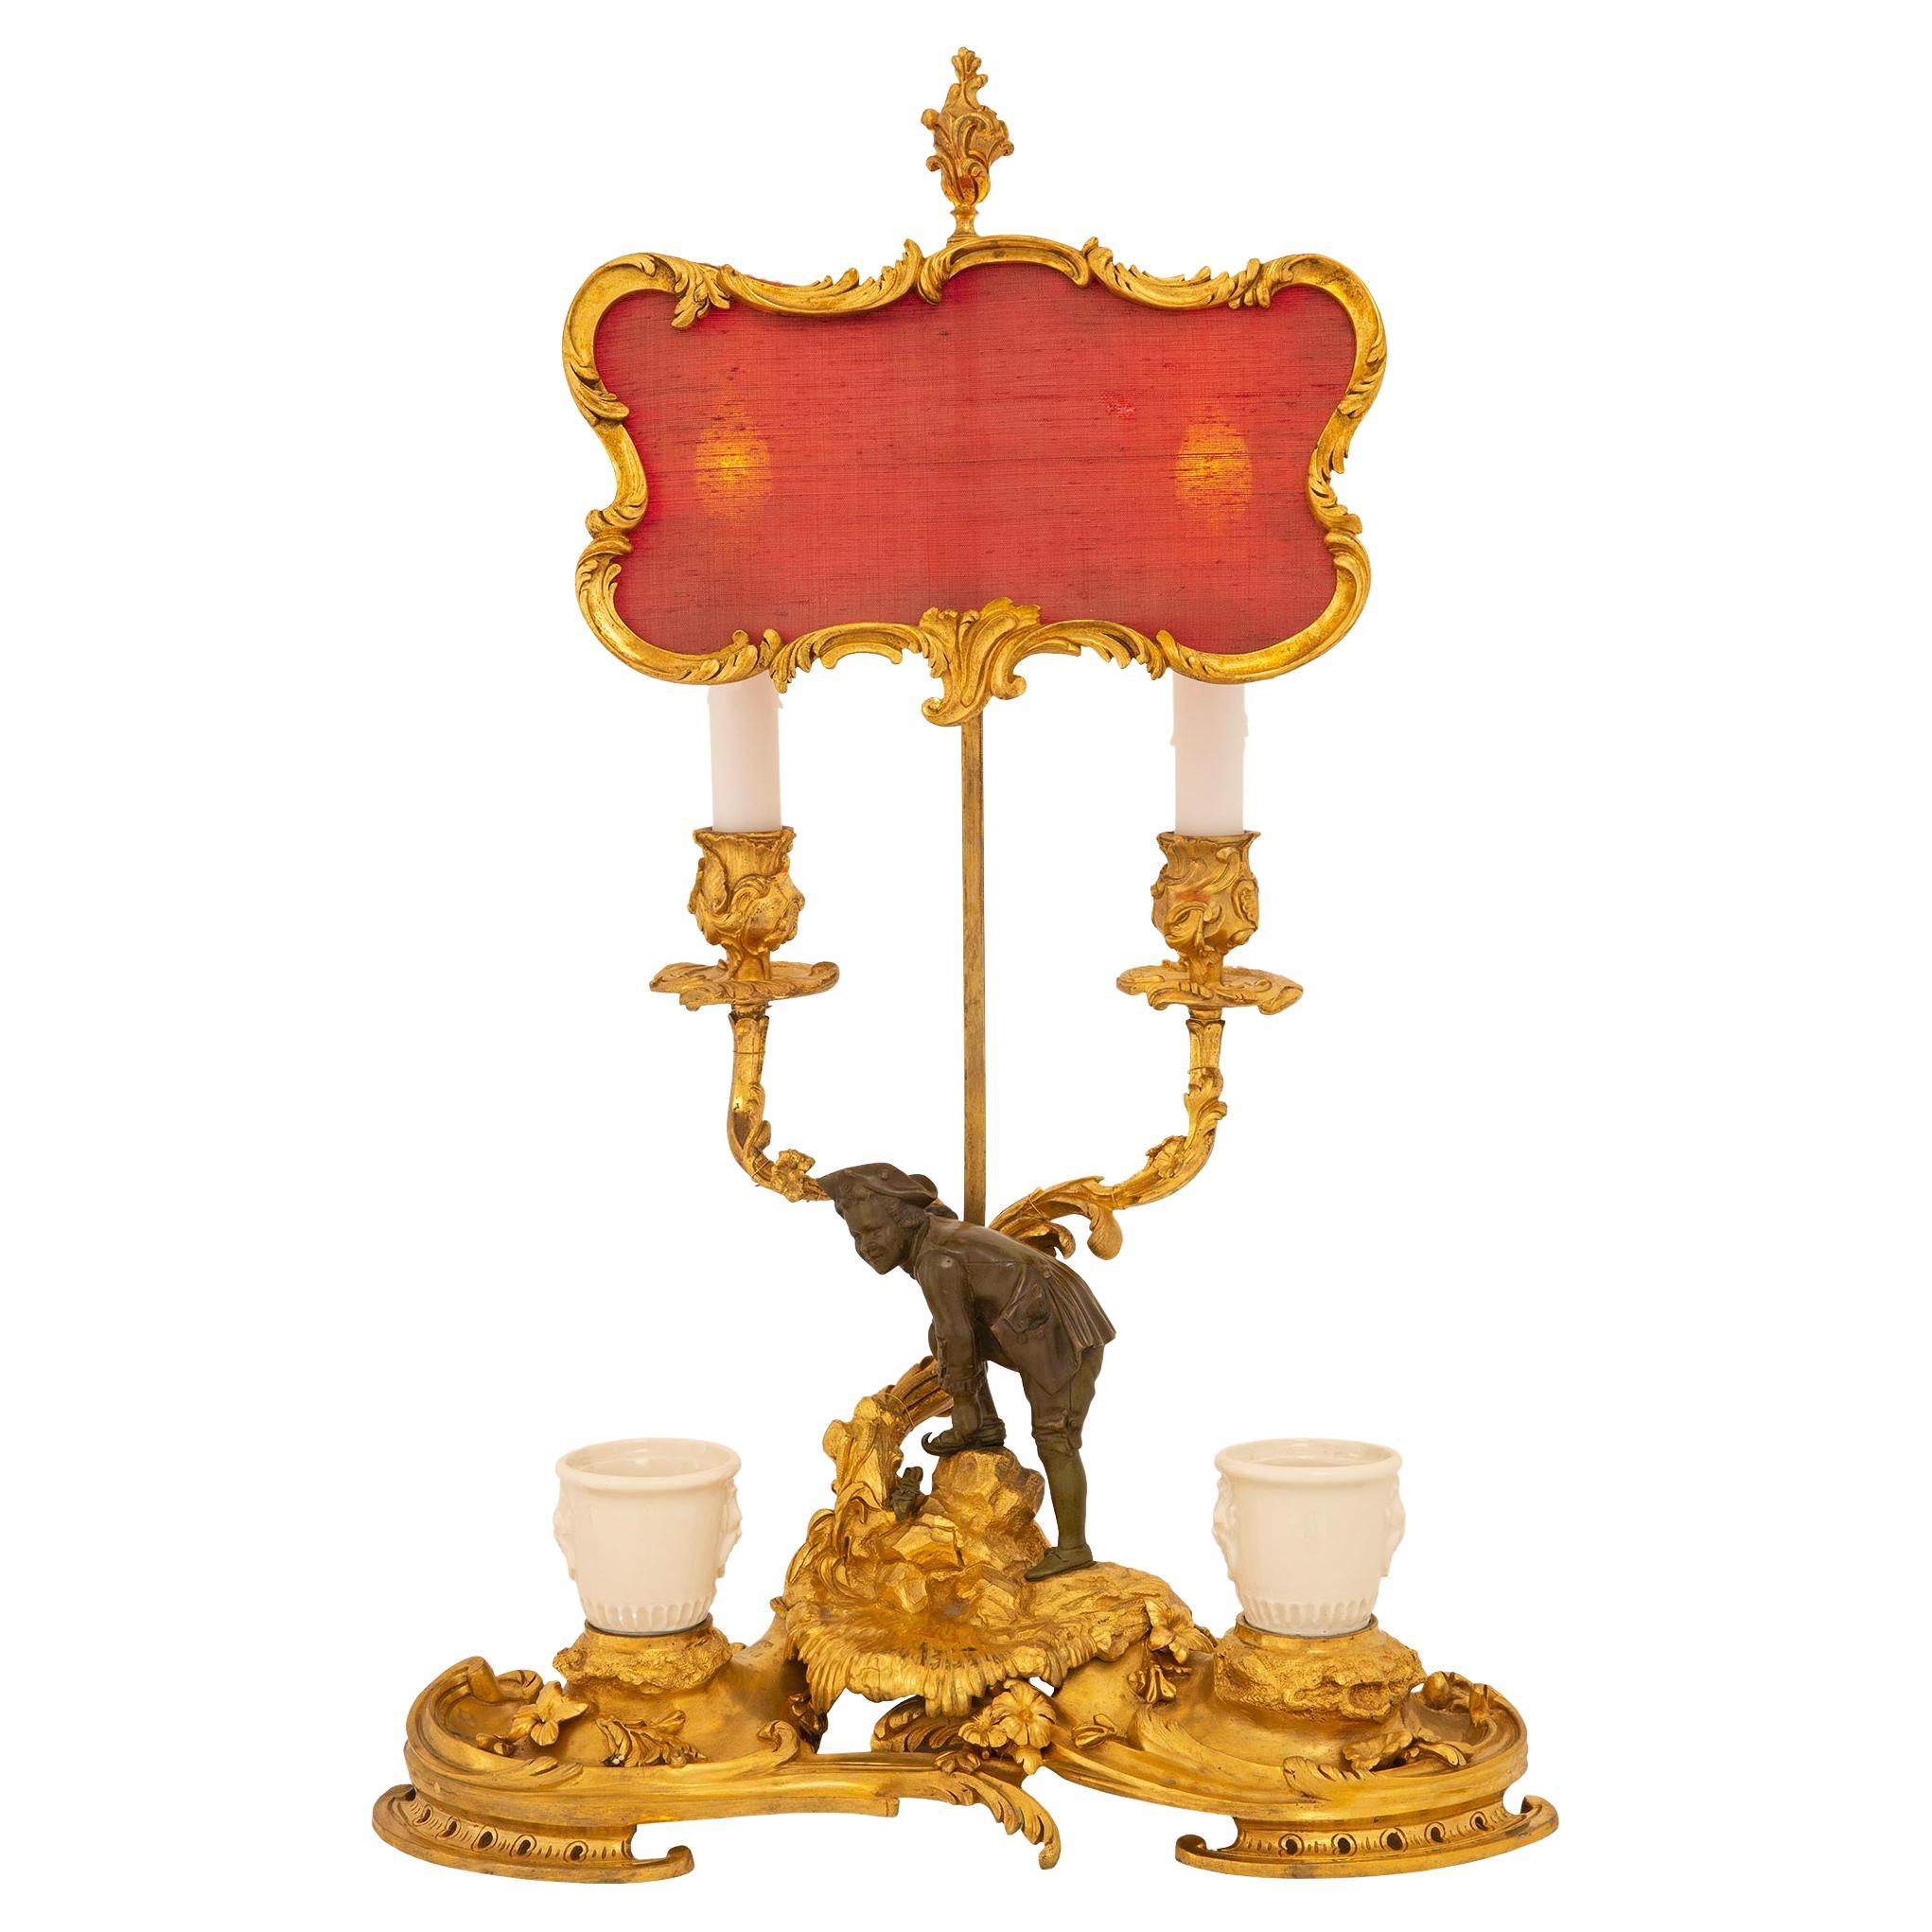 French Mid-19th Century Louis XV Style Ormolu Candelabra Lamp For Sale